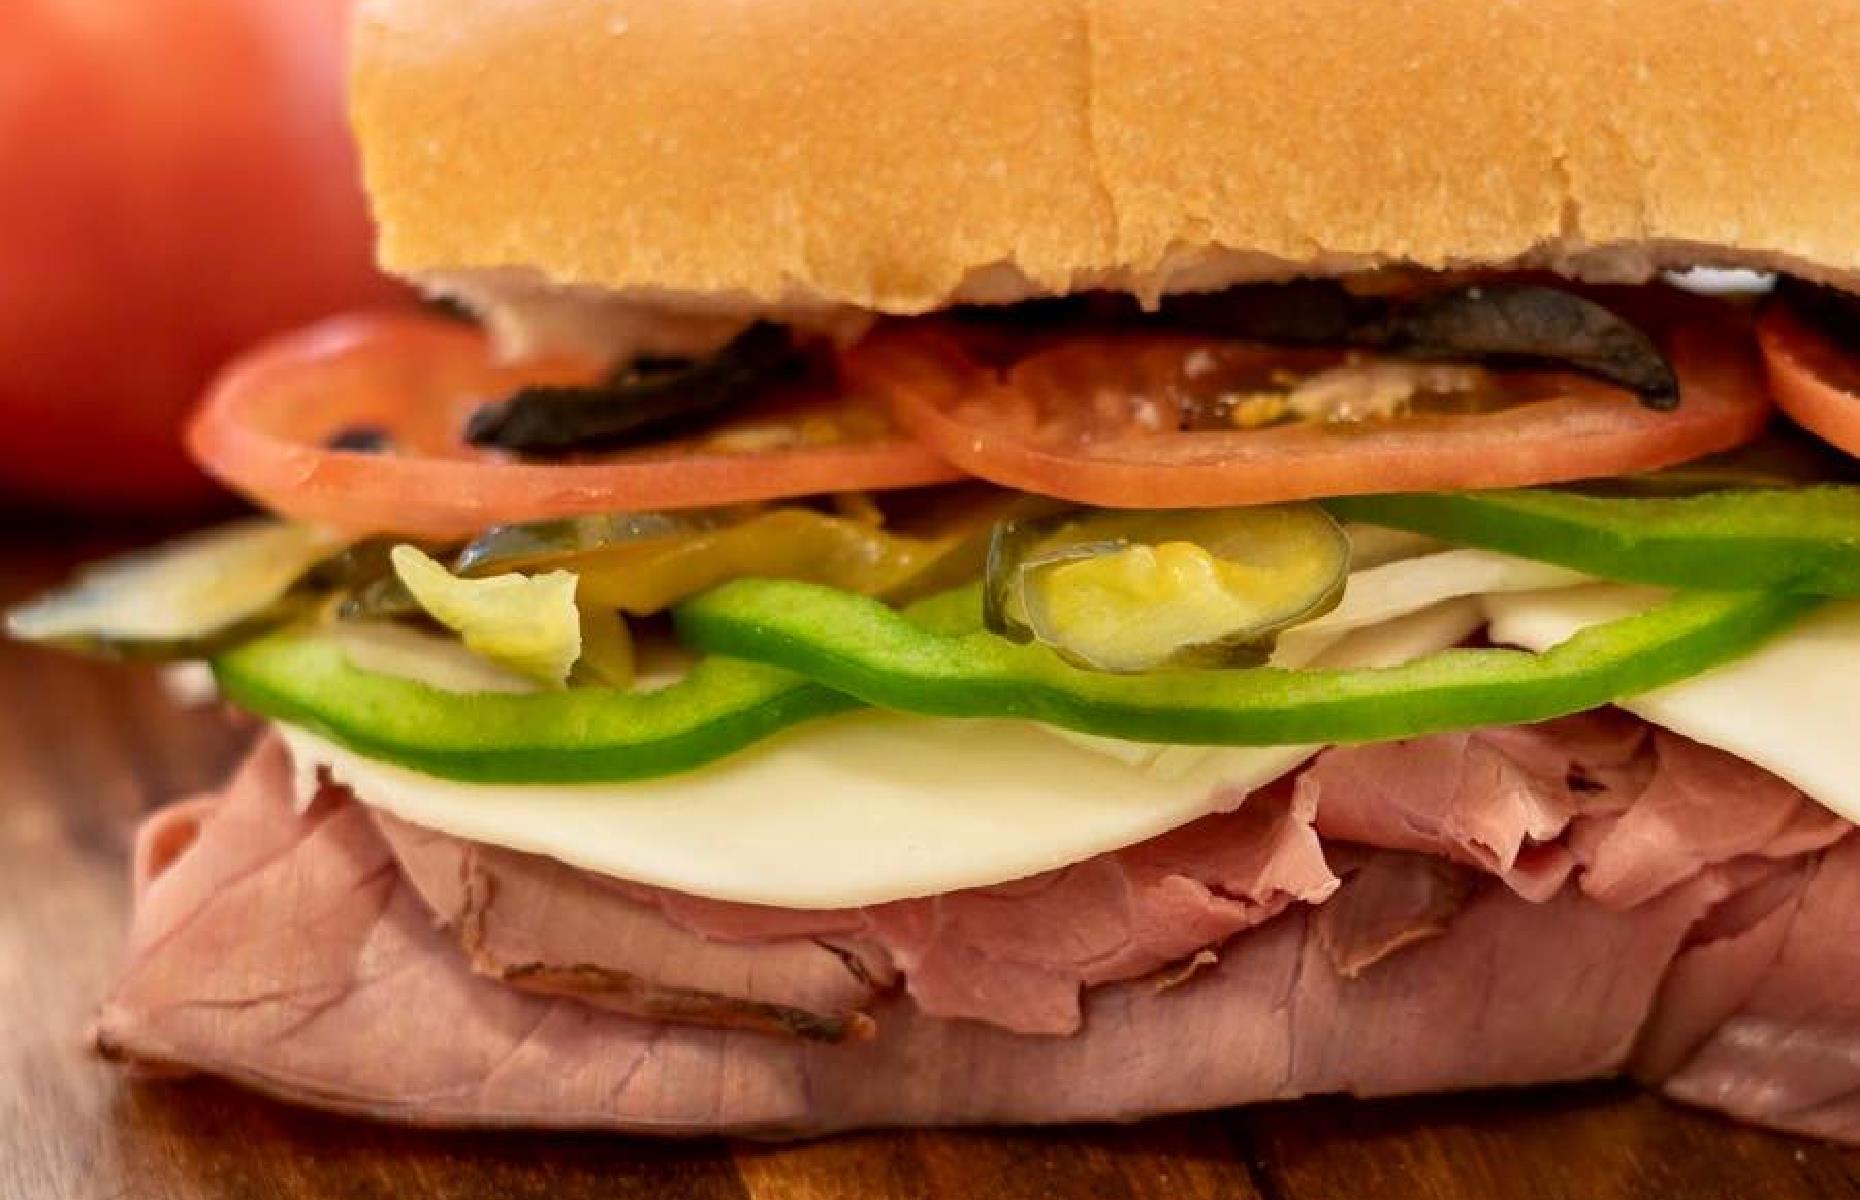 Copycat Subway Turkey Sandwich with Ham - From Michigan To The Table